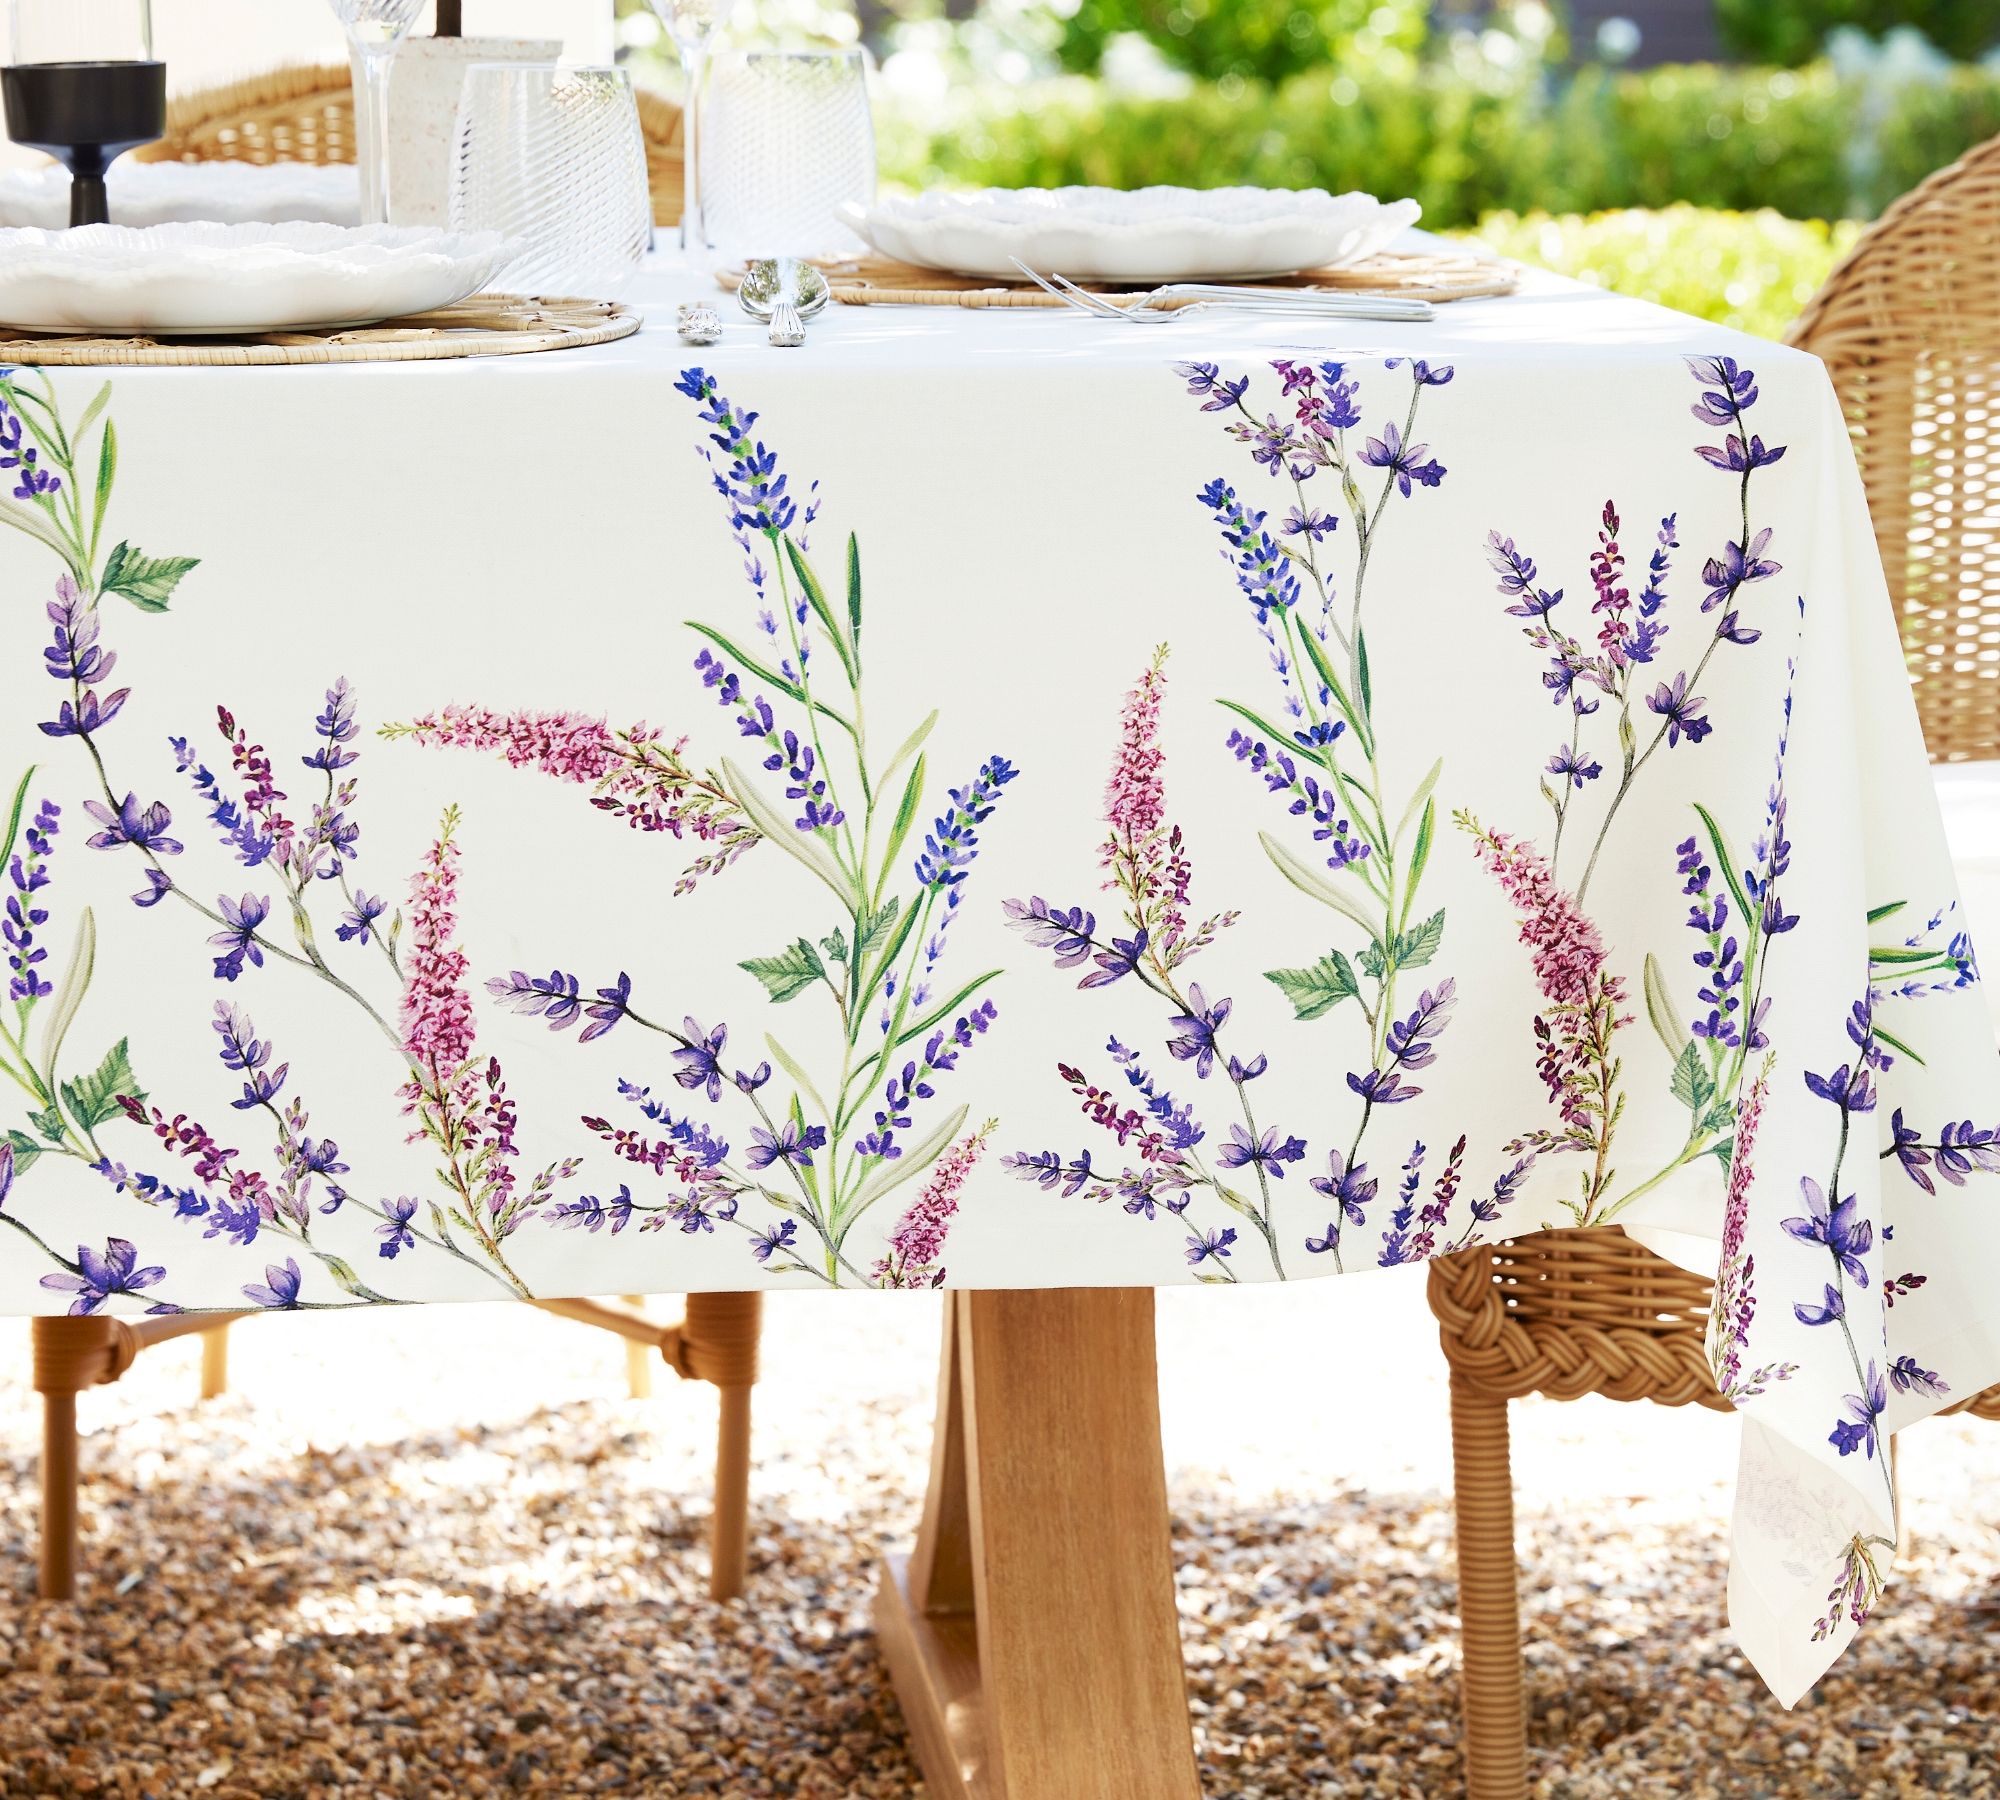 Monique Lhuillier Provence Embroidered Oilcloth Tablecloth